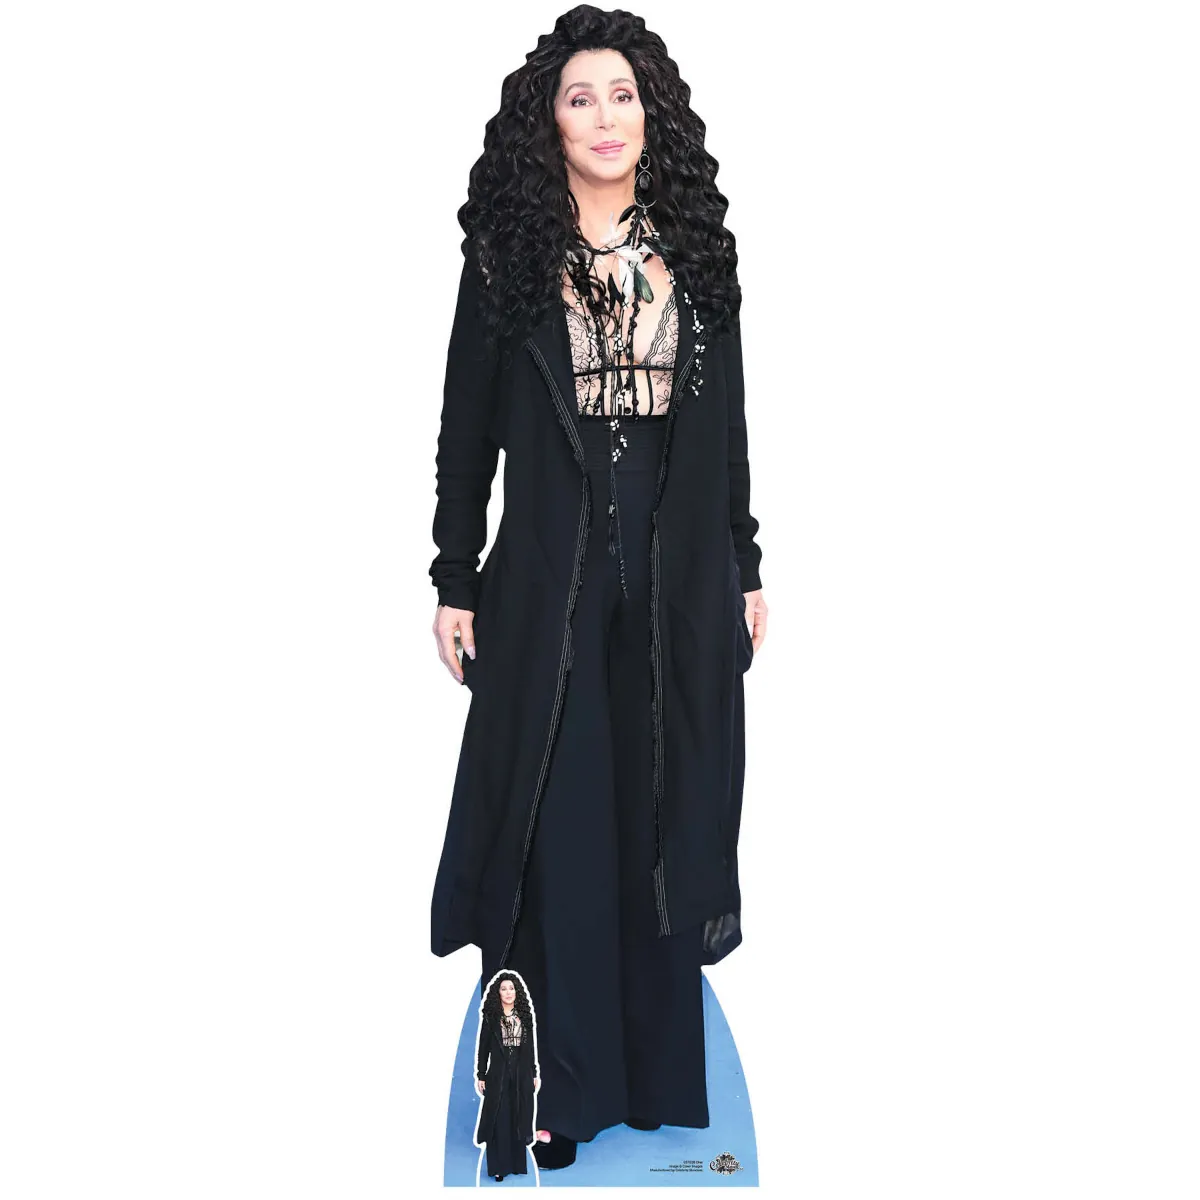 CS1038 Cher 'Black Outfit' (American Singer) Lifesize + Mini Cardboard Cutout Standee Front